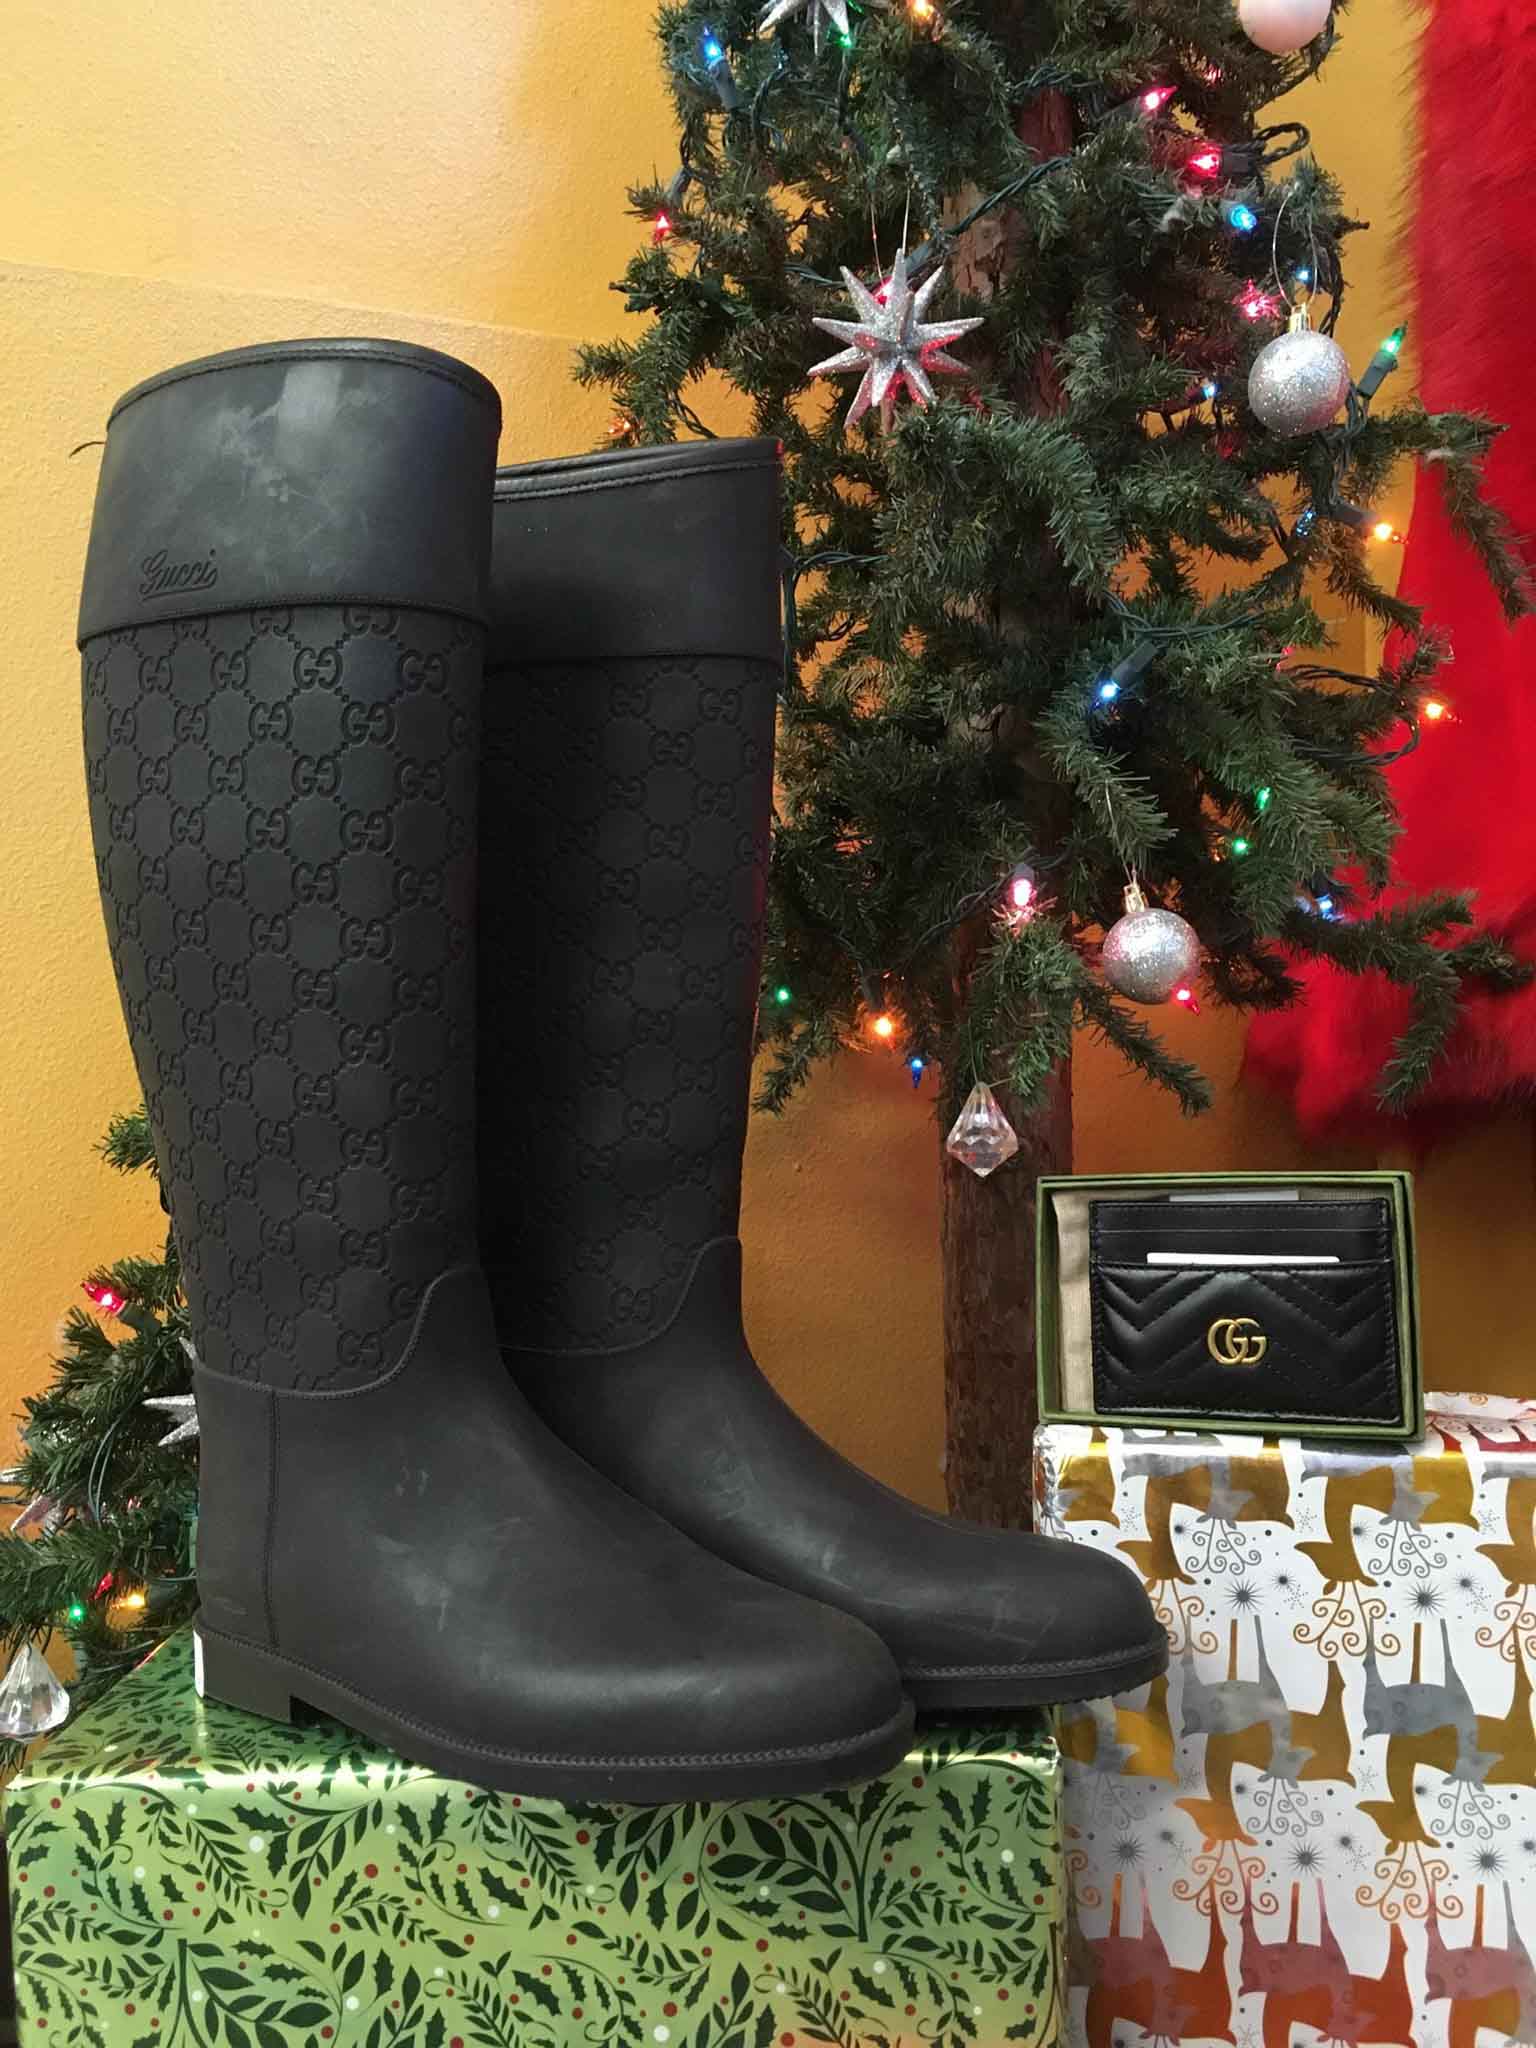 A pair of black Gucci rain boots and a Gucci card holder on top of Christmas boxes